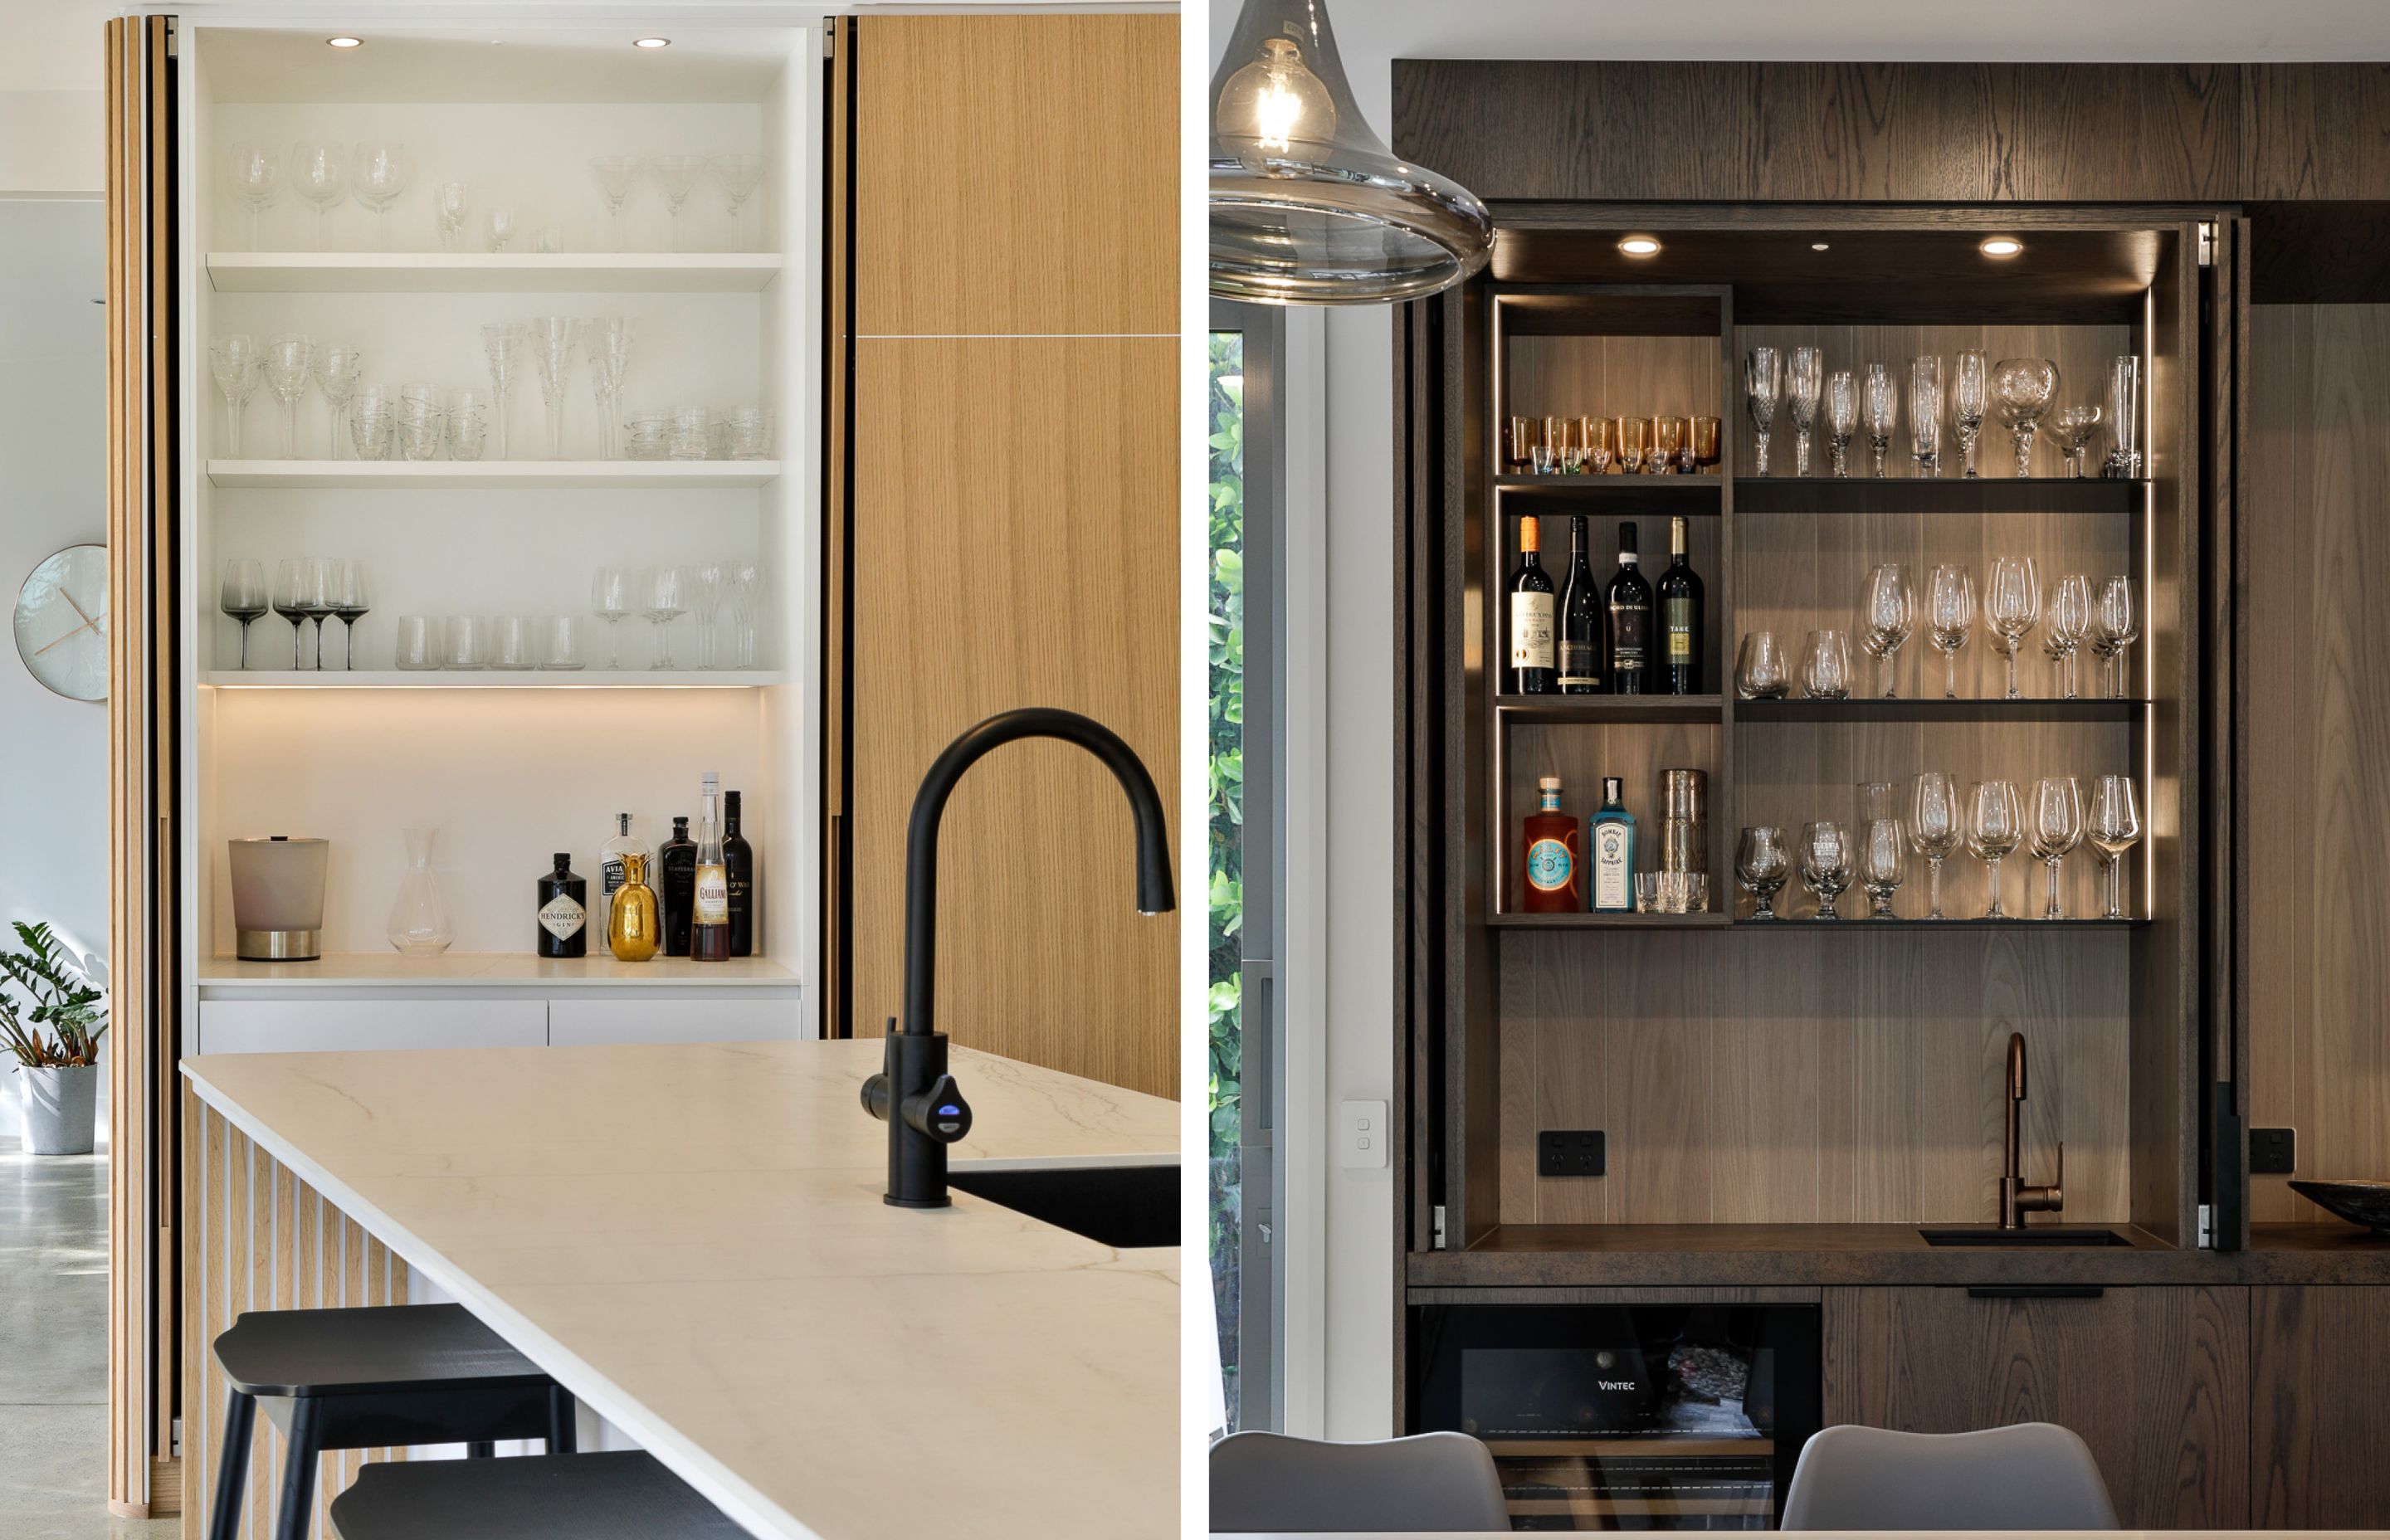 Häfele's Hawa Concepta Pocket Fold Sliding Doors system was incorporated into both of these kitchens for its ability to house the doors within the cavity, creating a flush look when fully open.